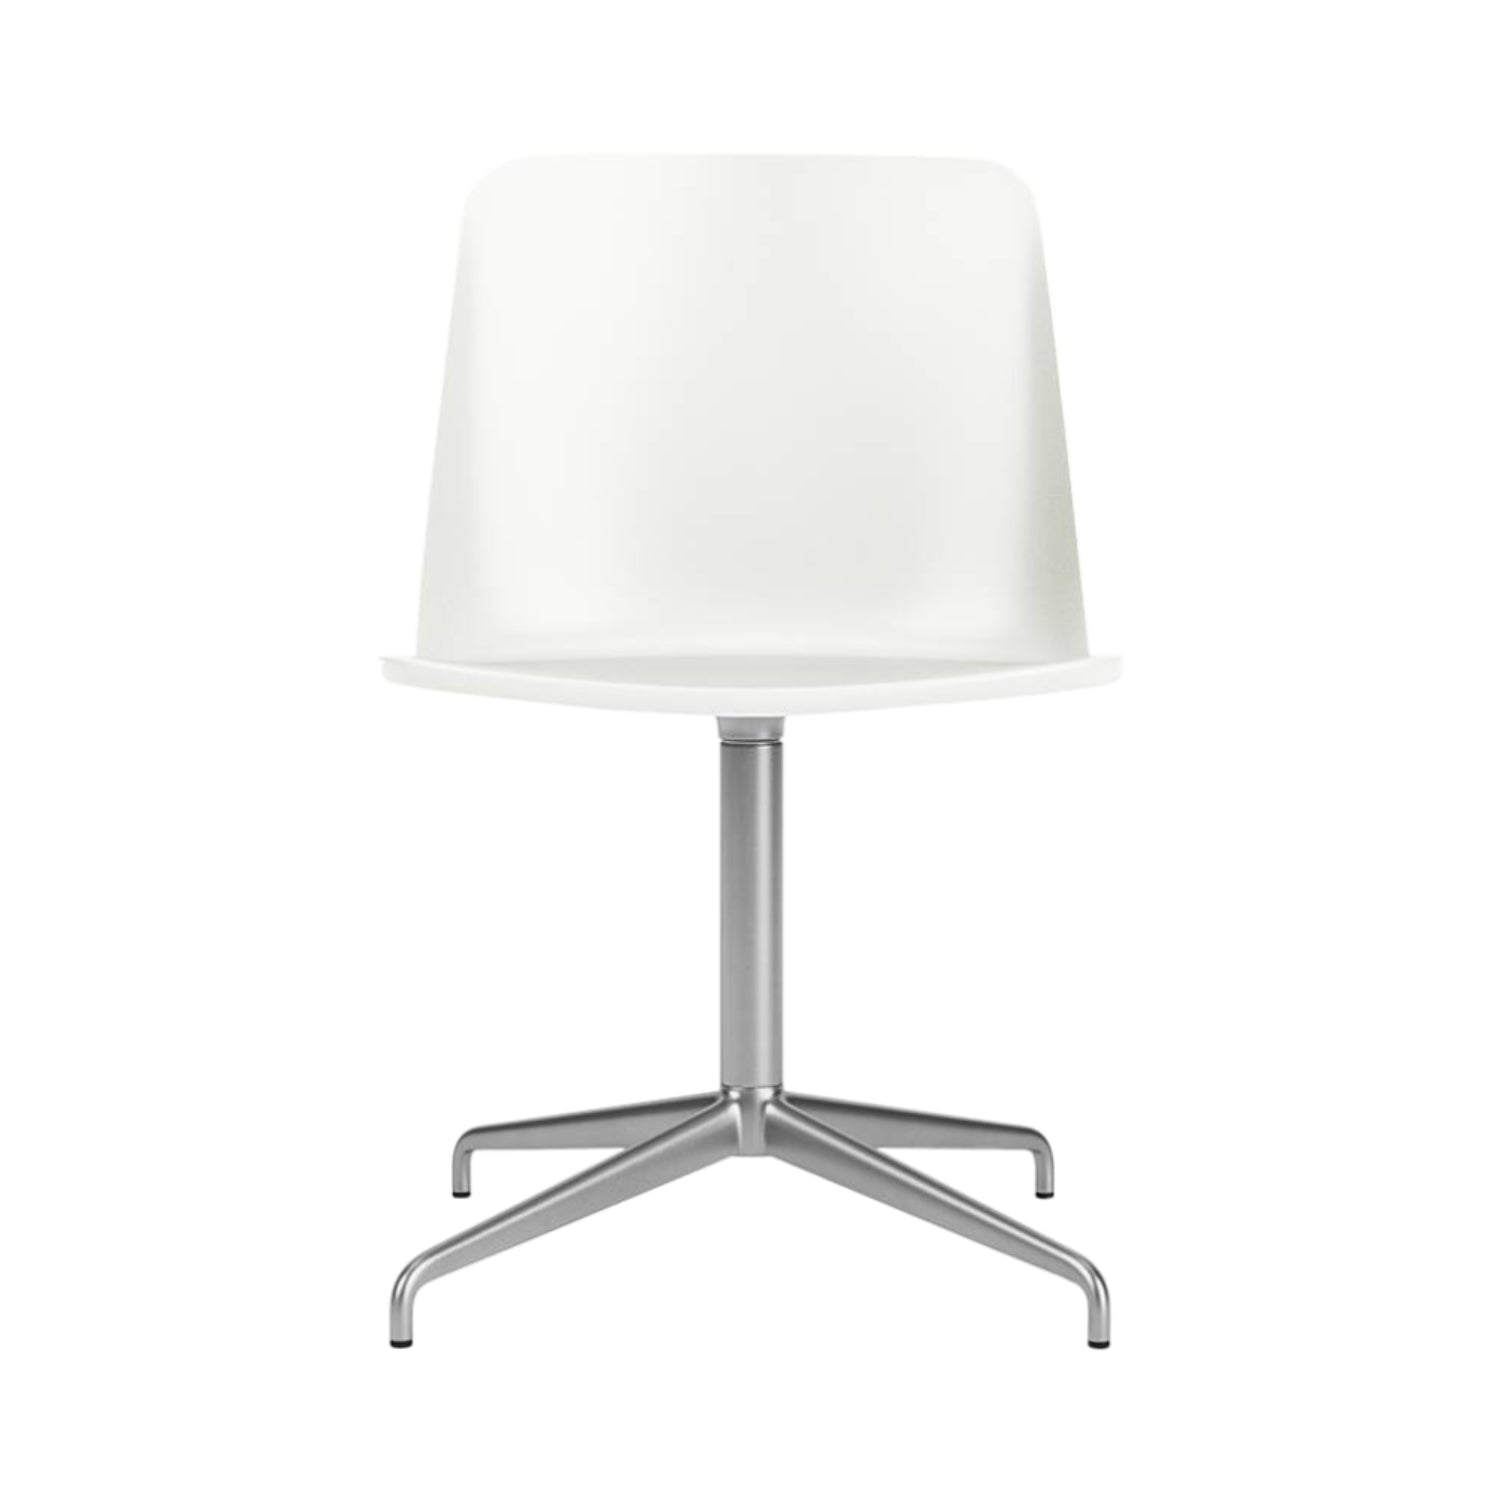 Rely Chair HW11: White + Polished Aluminum